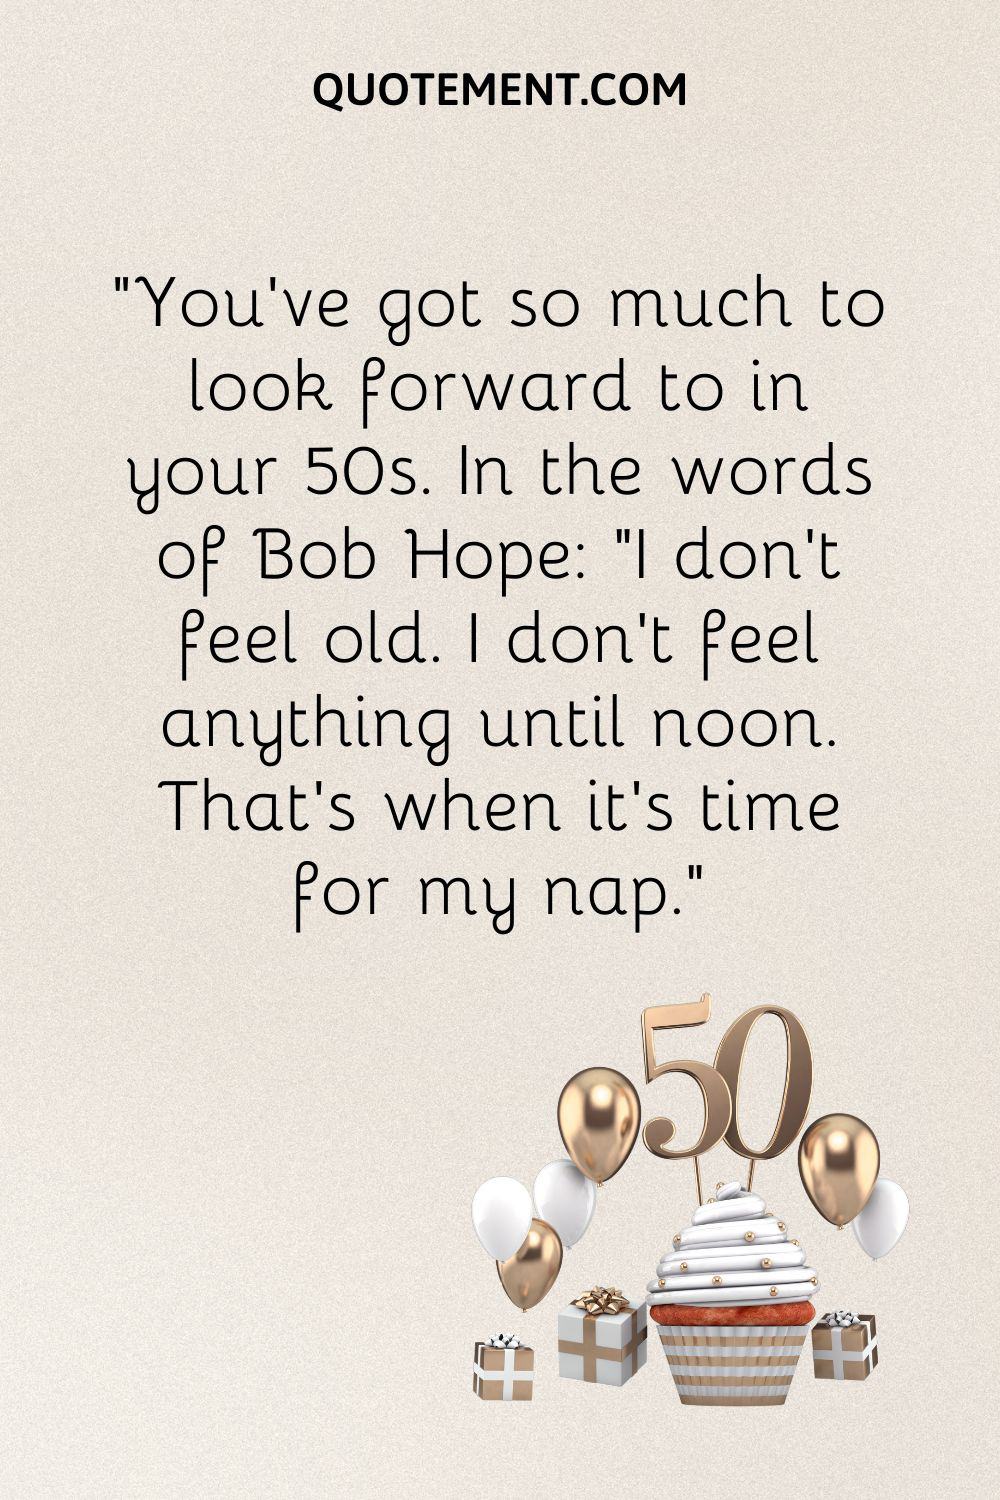 “You've got so much to look forward to in your 50s. In the words of Bob Hope I don't feel old. I don't feel anything until noon. That's when it's time for my nap.